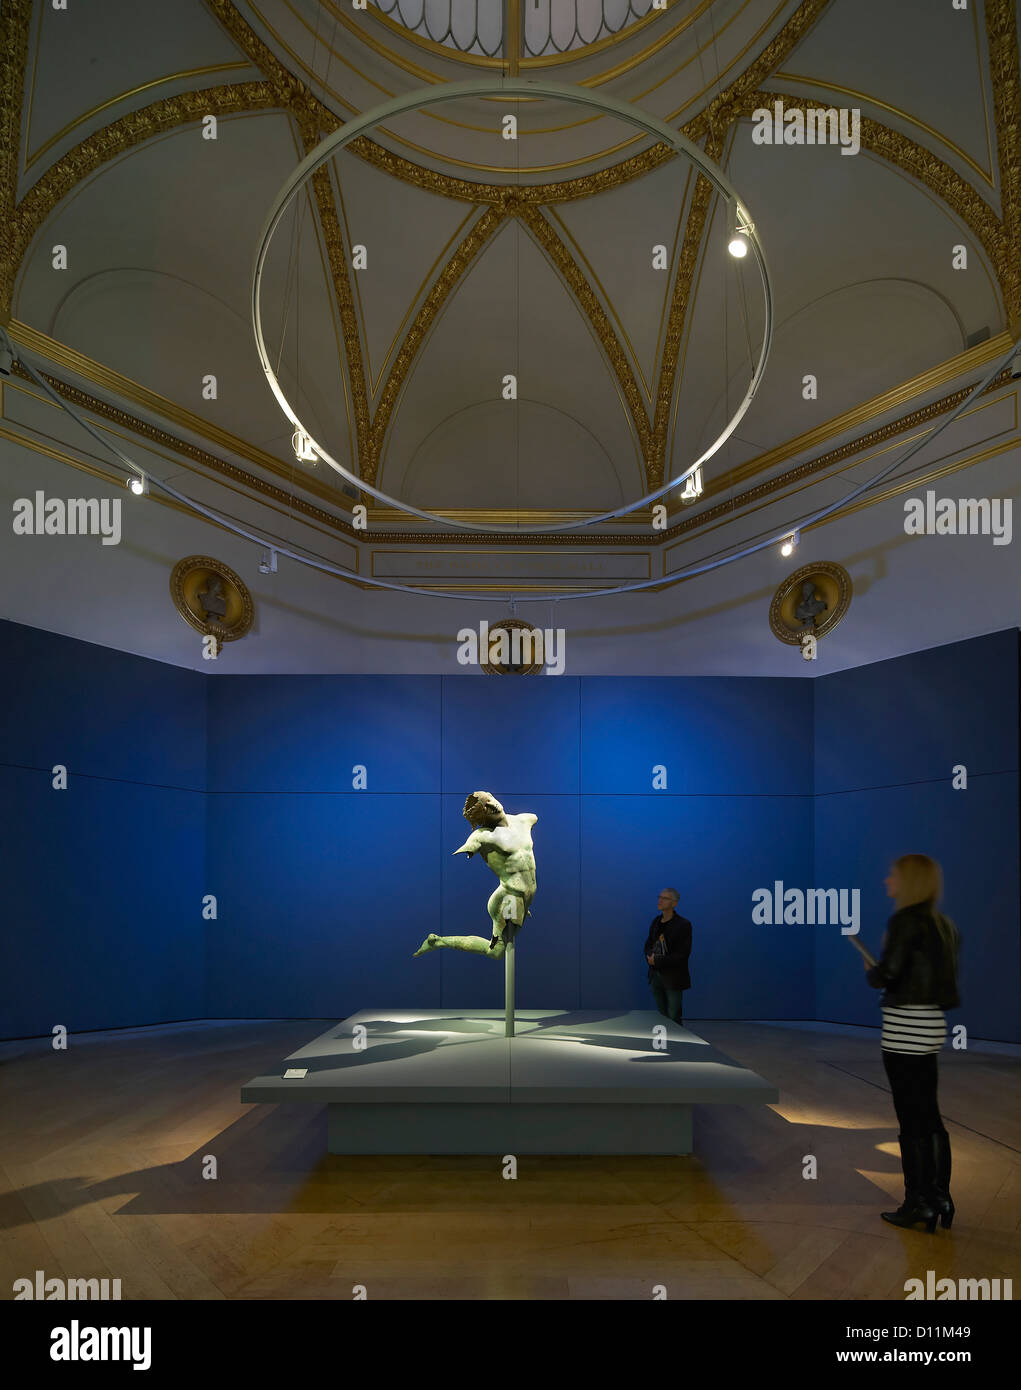 Royal Academy Bronze Exhibition, London, United Kingdom. Architect: Stanton Williams, 2012. Blue Room with Dancing Satyr. Stock Photo